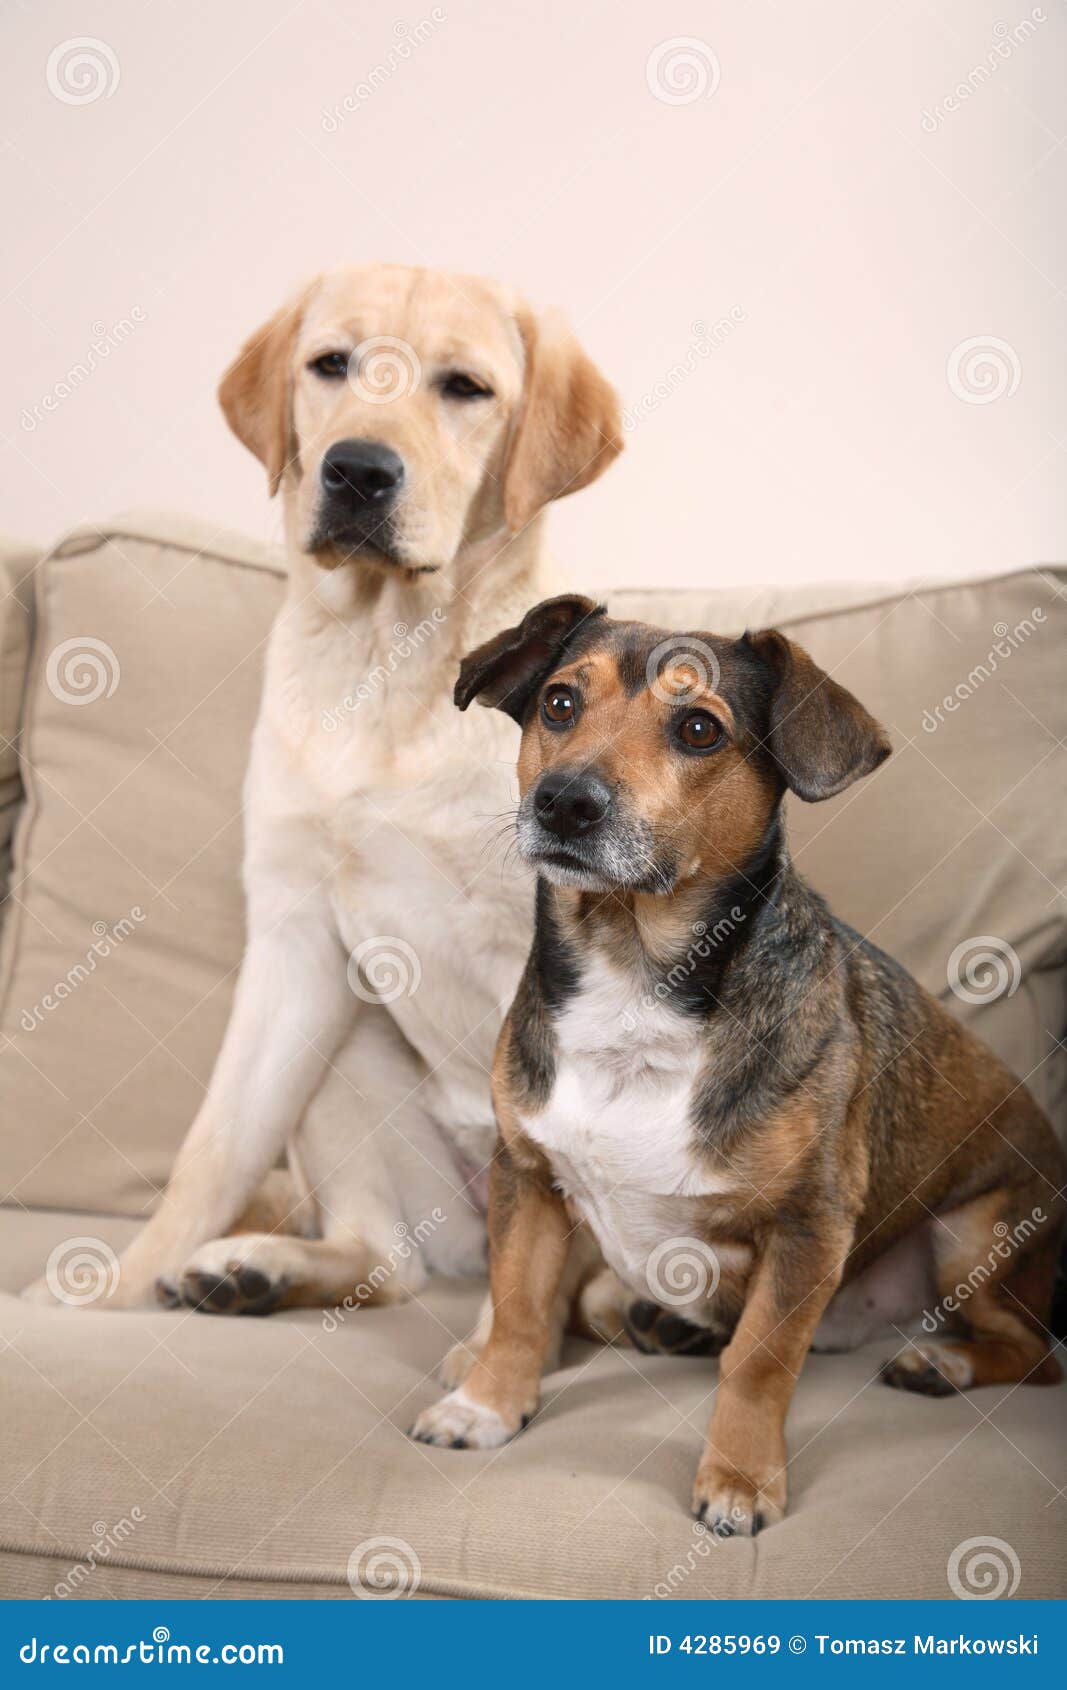 Two Dogs On A Couch Royalty Free Stock Images Image 4285969